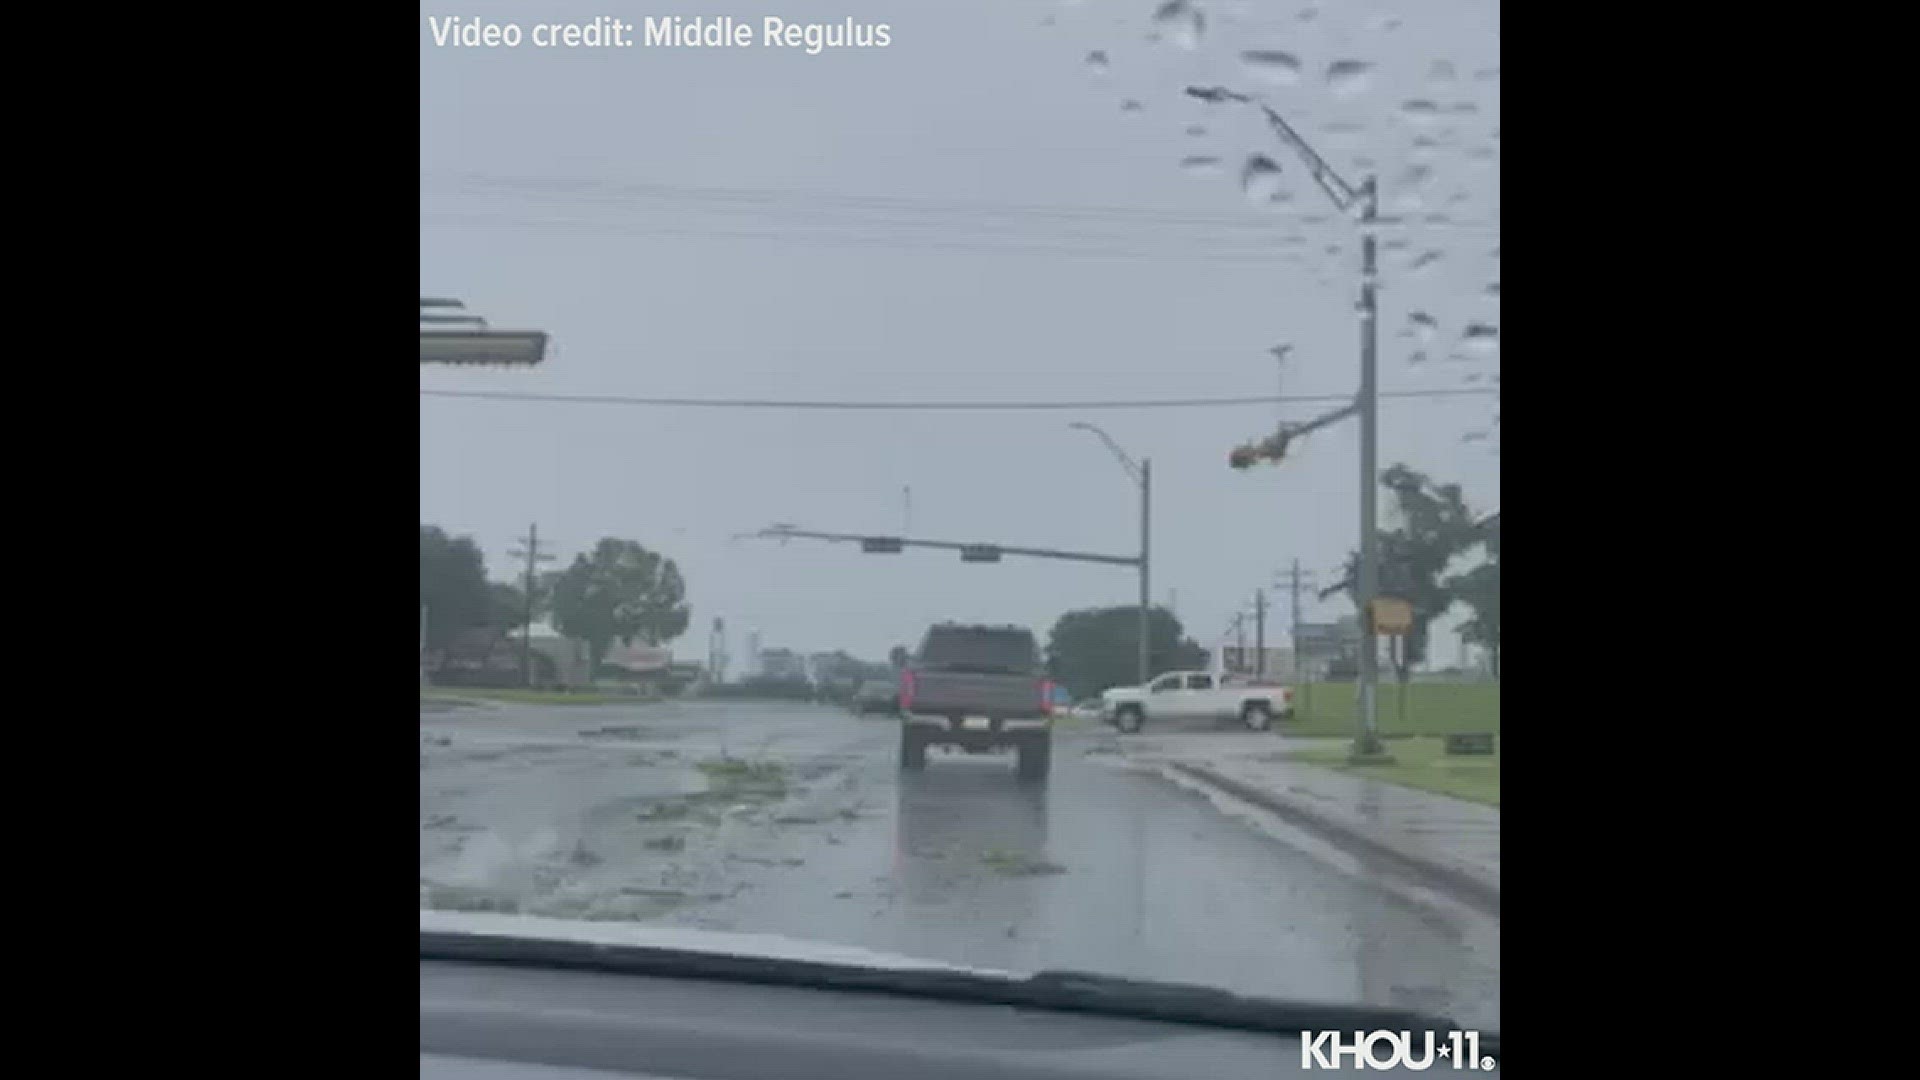 Middle Regulus shared this video with us from Huntsville, showing damage there from Tuesday's storms.